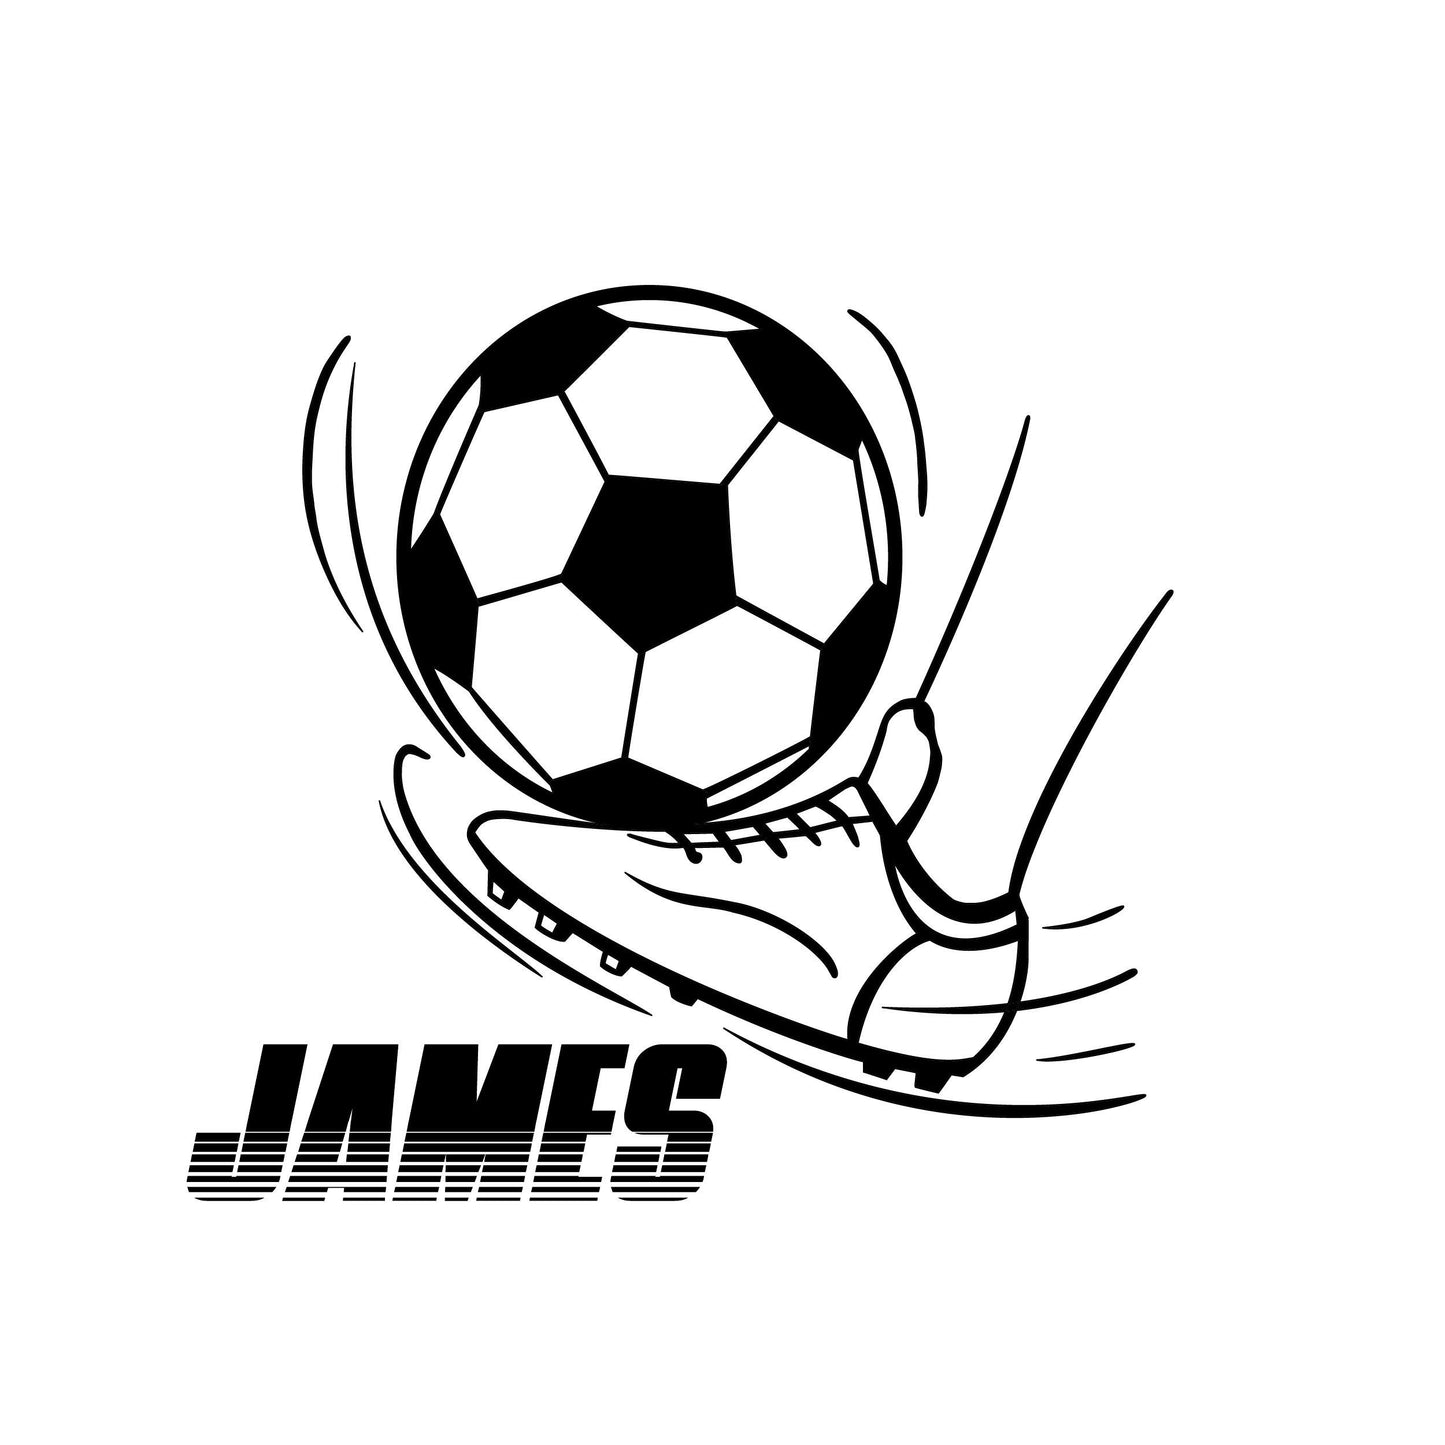 Wall Decal Soccer Ball with Your Name - Personalized Name Wall Decal For Children - Wall Stickers For Soccer Players